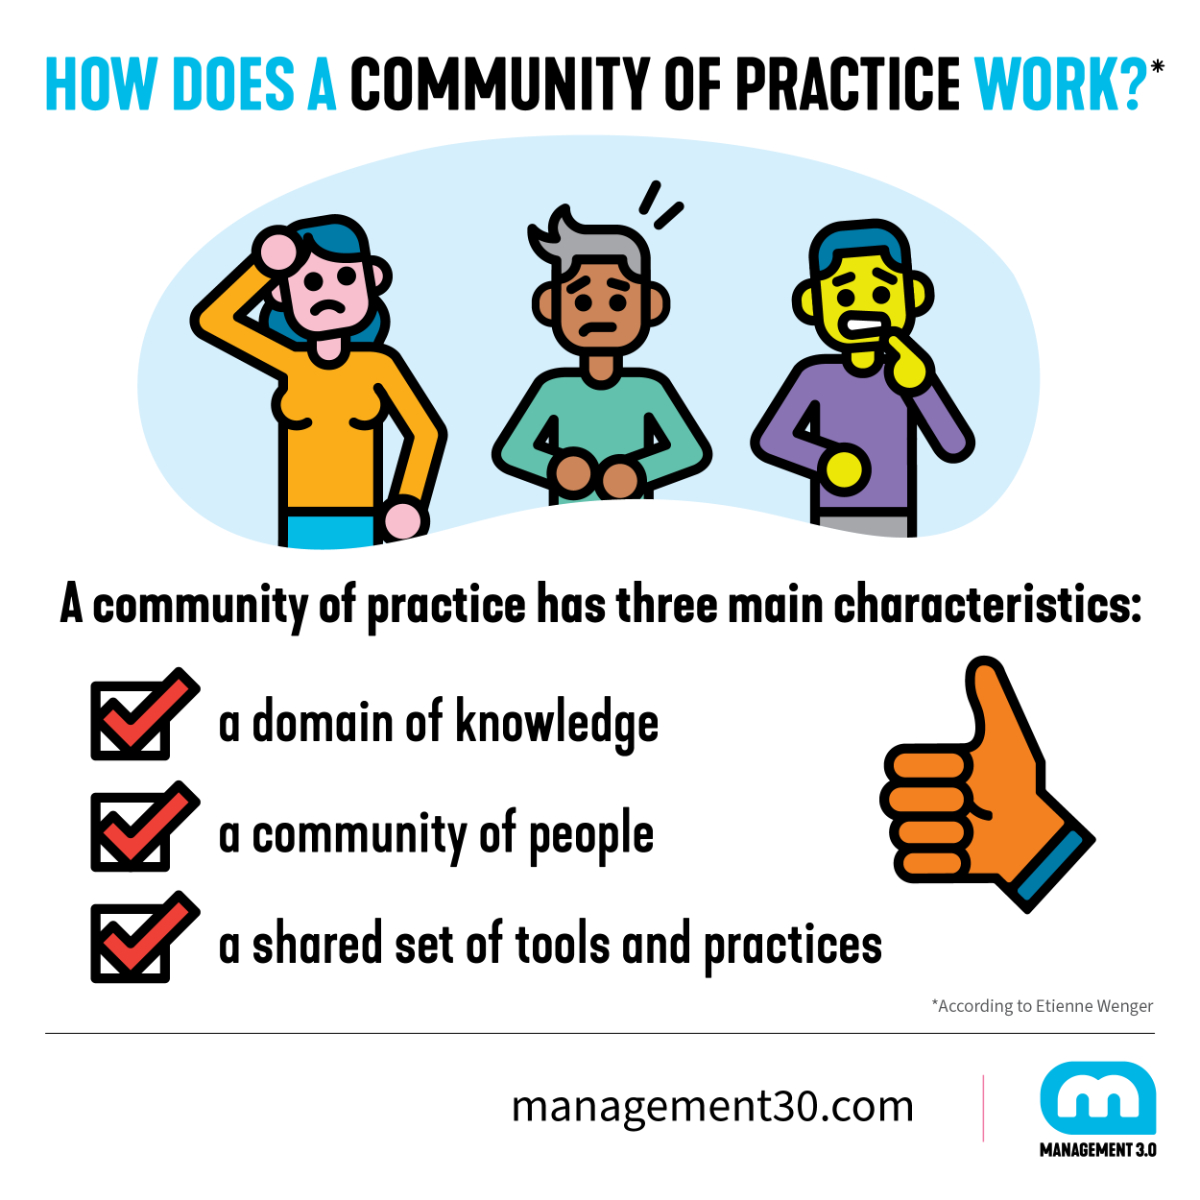 How does a Community of Practice work?